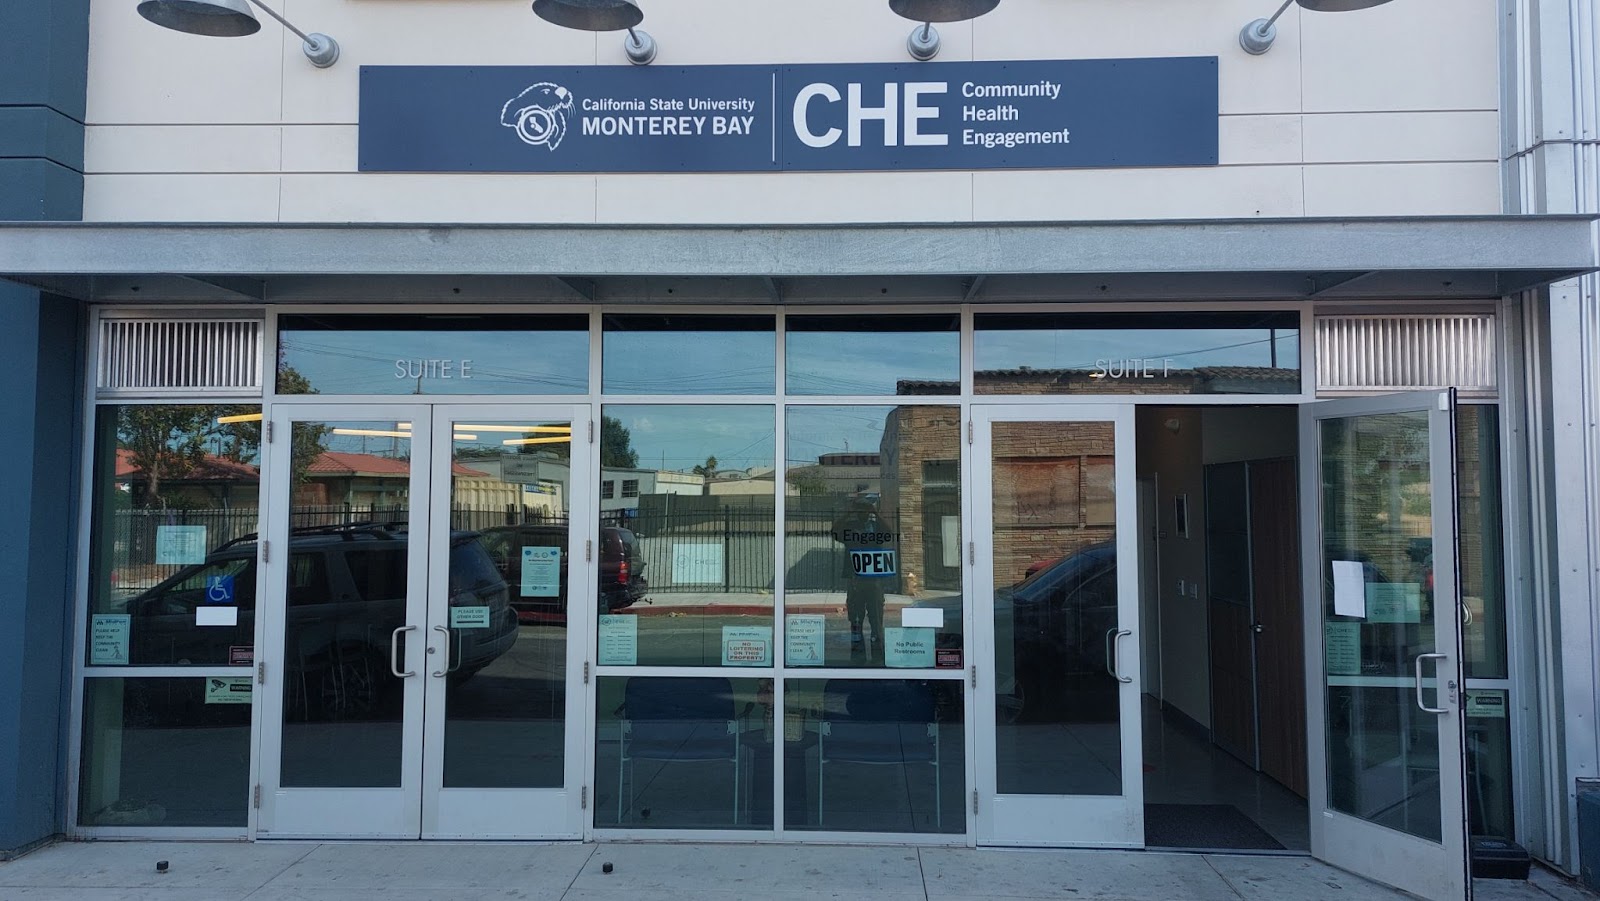 The main doors and storefront of CHE including CSUMB logos